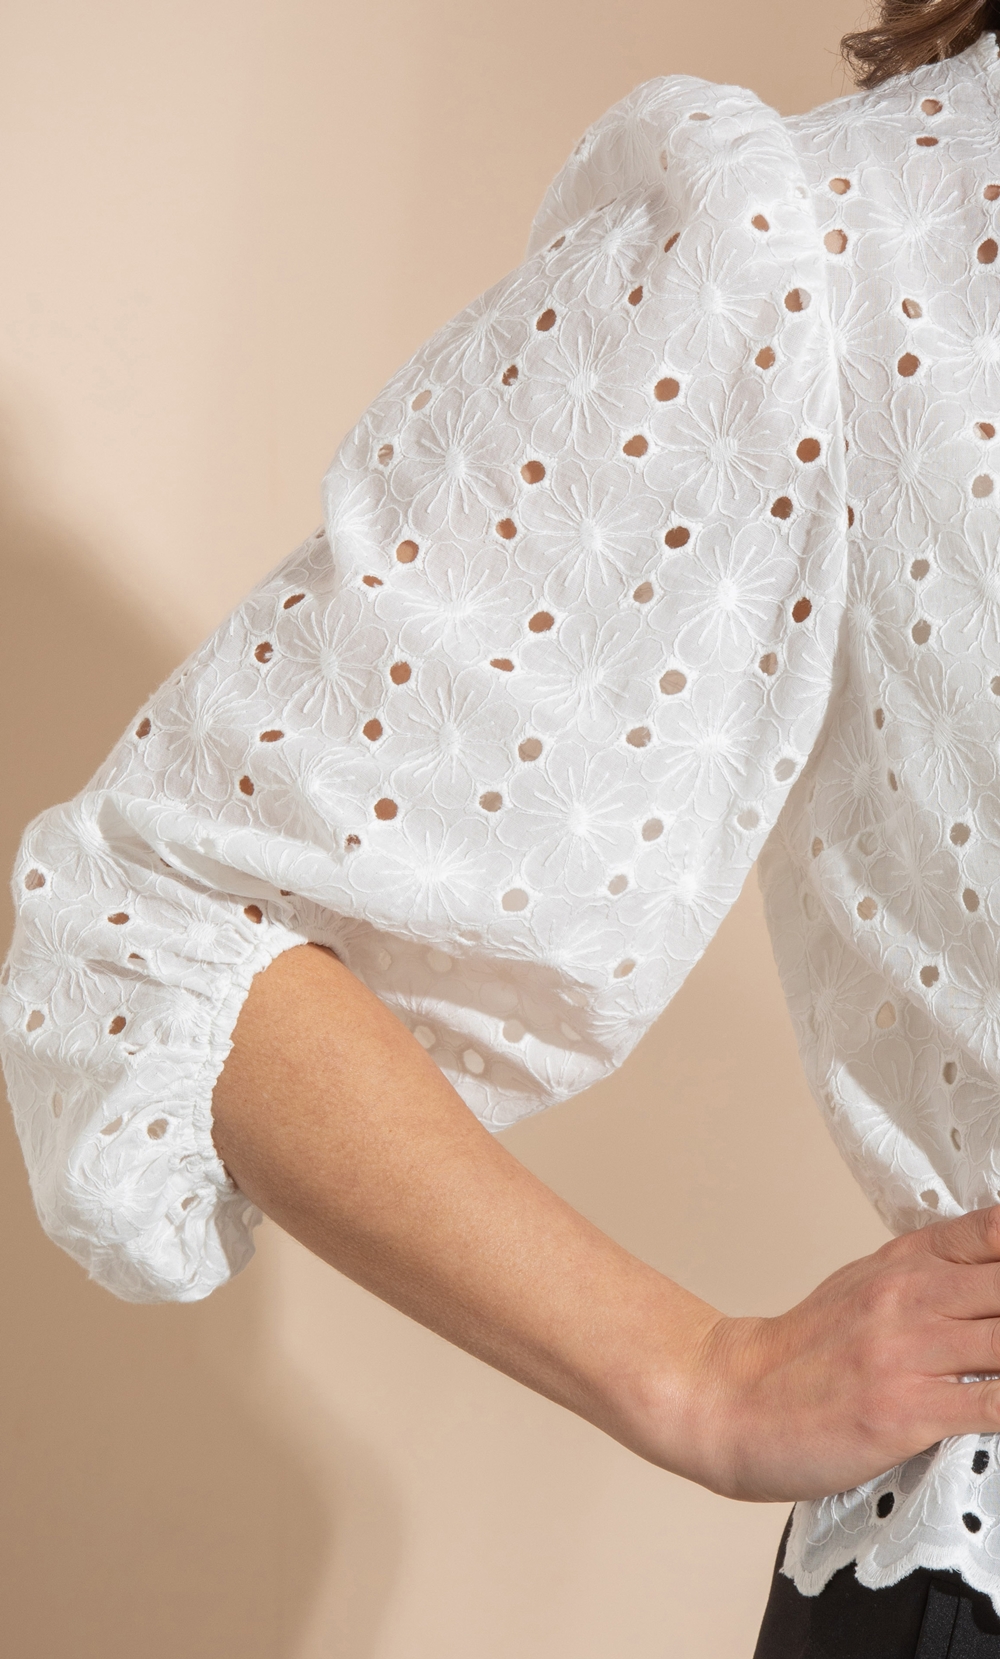 Broderie Anglaise Puff Sleeve Top